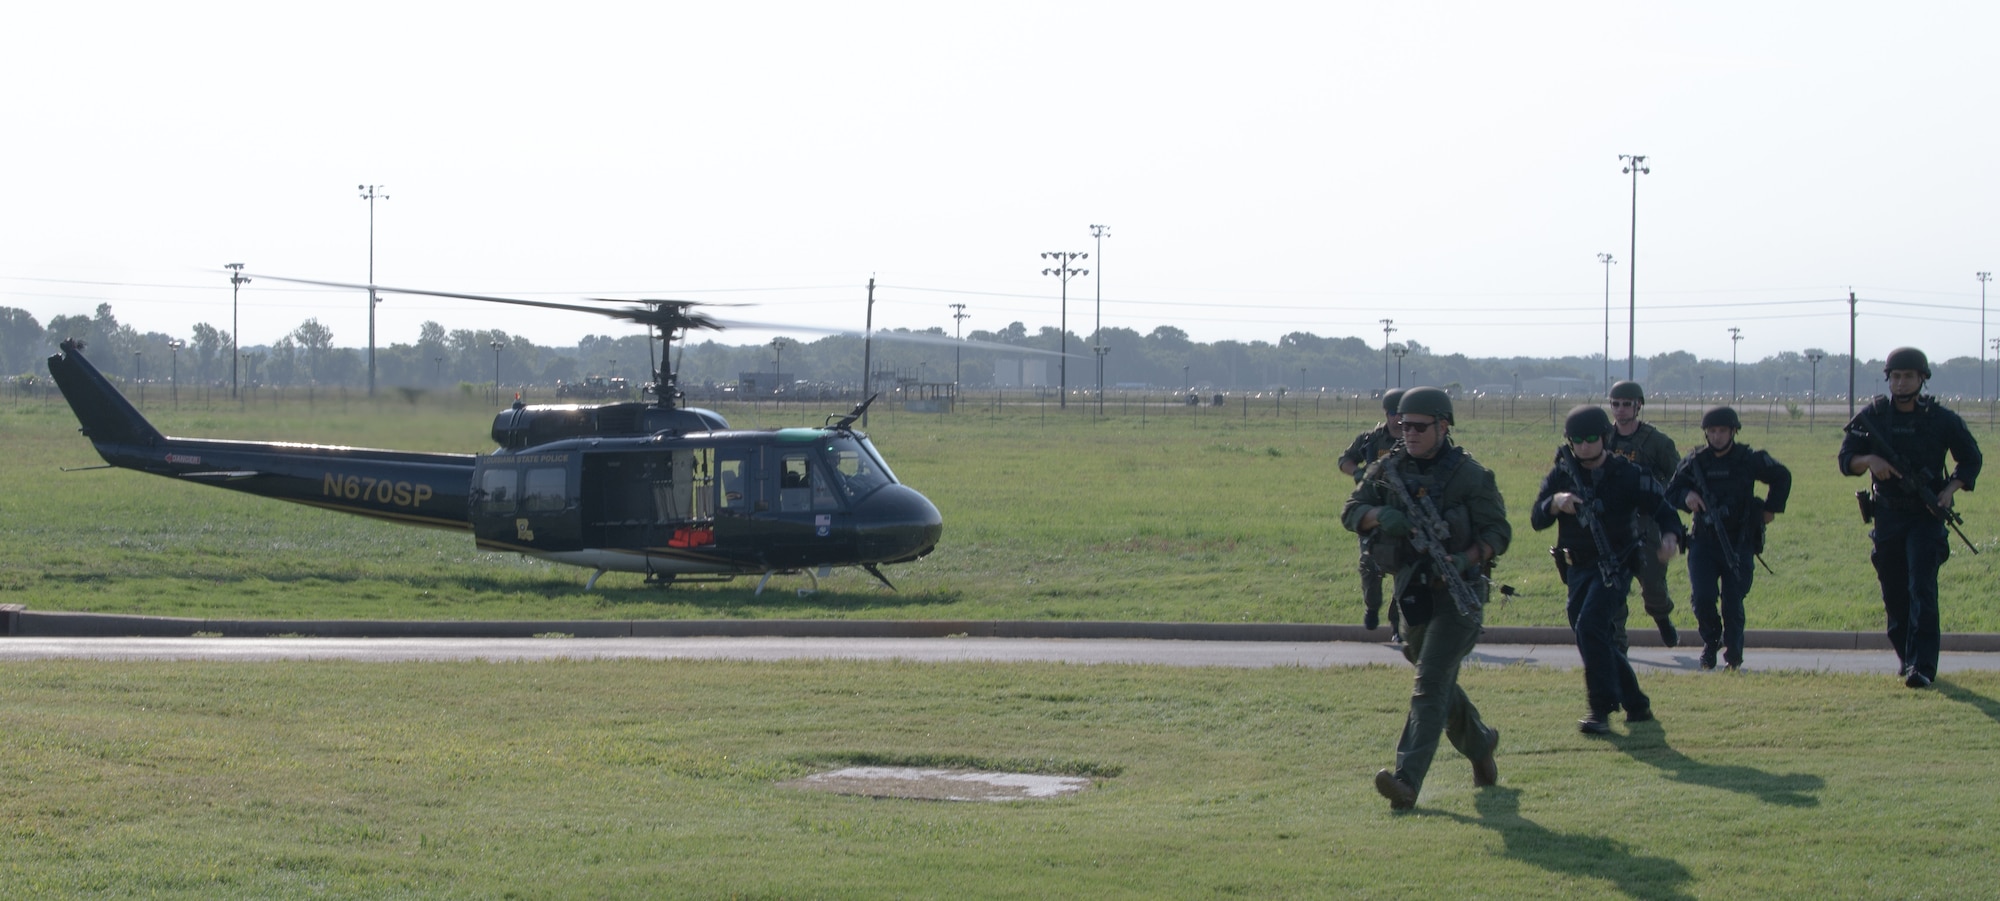 The training event integrated the Louisiana State Police, Louisiana State Police SWAT, 2nd Security Forces Squadron, and Mobile Field Force members. These are agencies who would work together during dangerous situations to help resolve them.